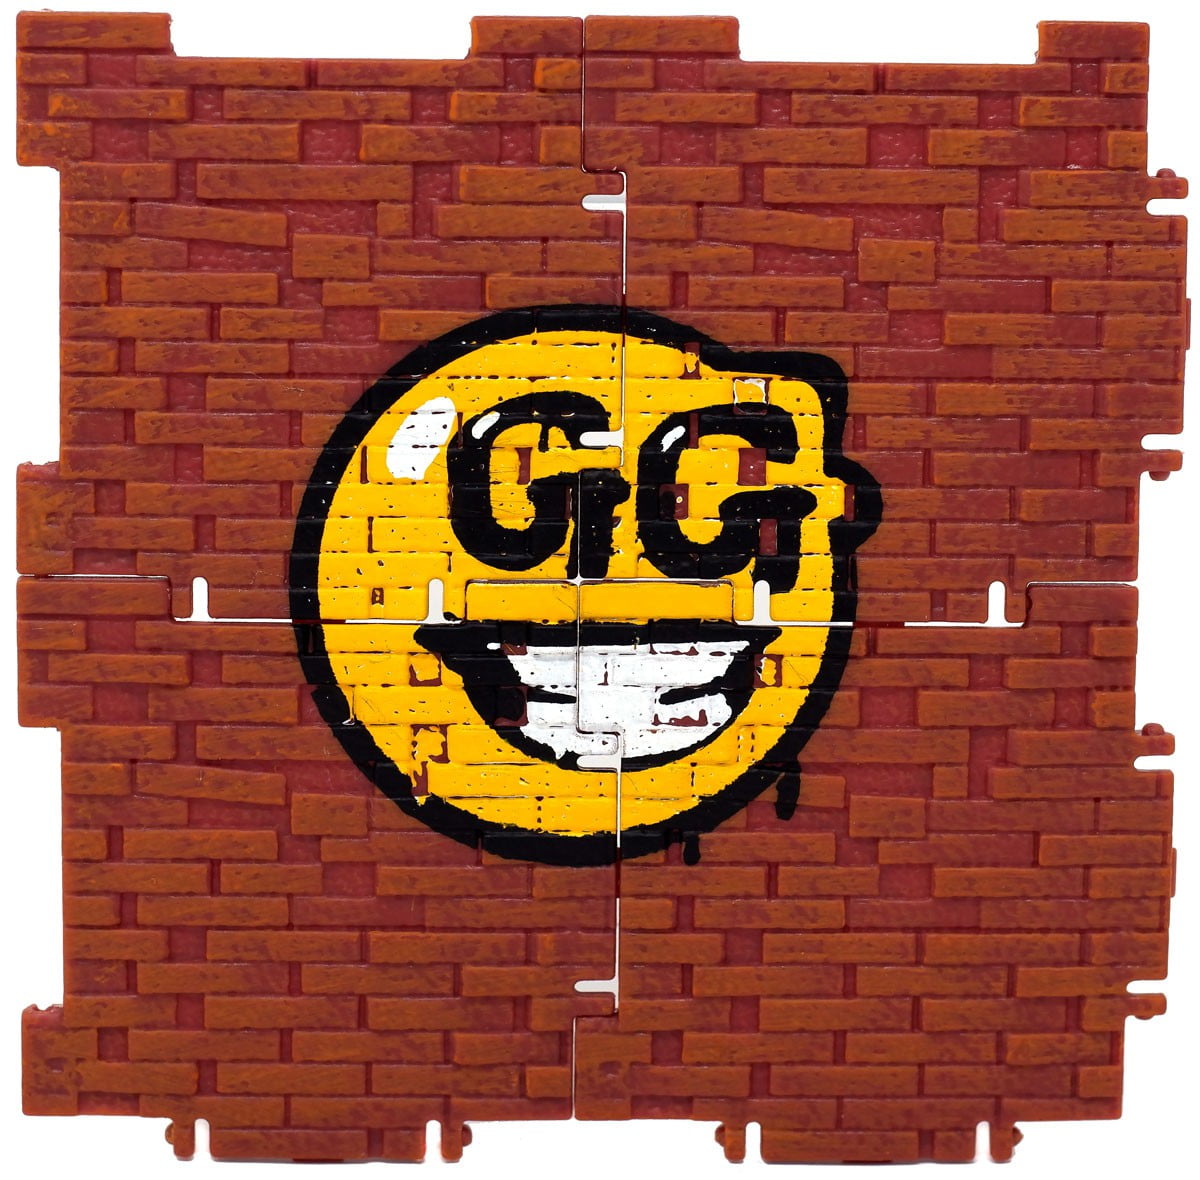 Fortnite Building Material with GG smiley face Figure ... - 1200 x 1180 jpeg 315kB